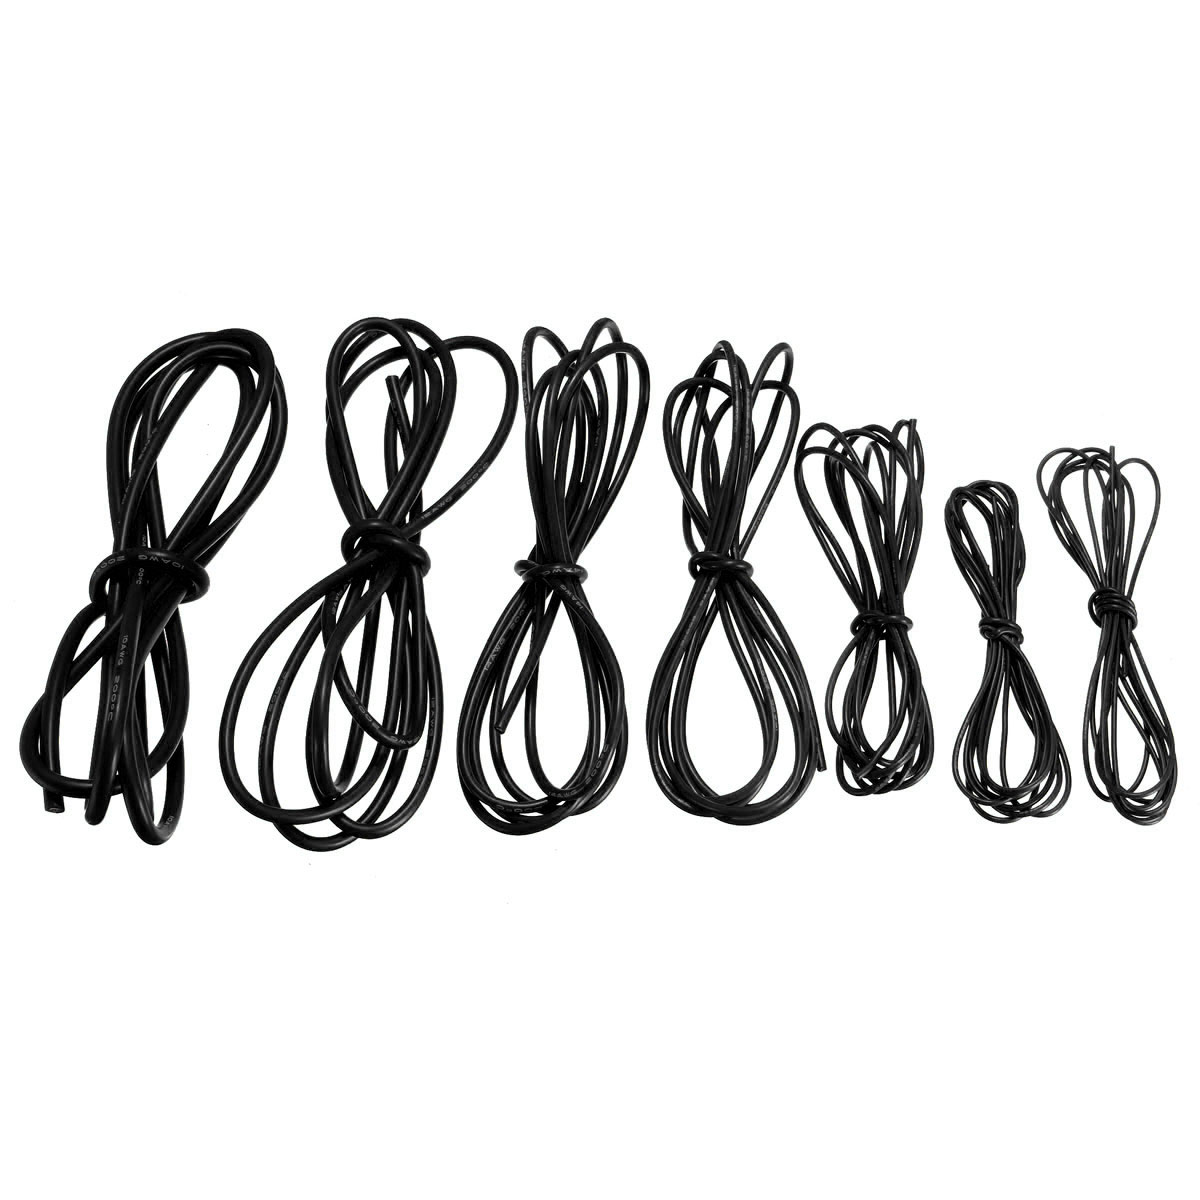 DANIU-2-Meter-Black-Silicone-Wire-Cable-10121416182022AWG-Flexible-Cable-1170287-1